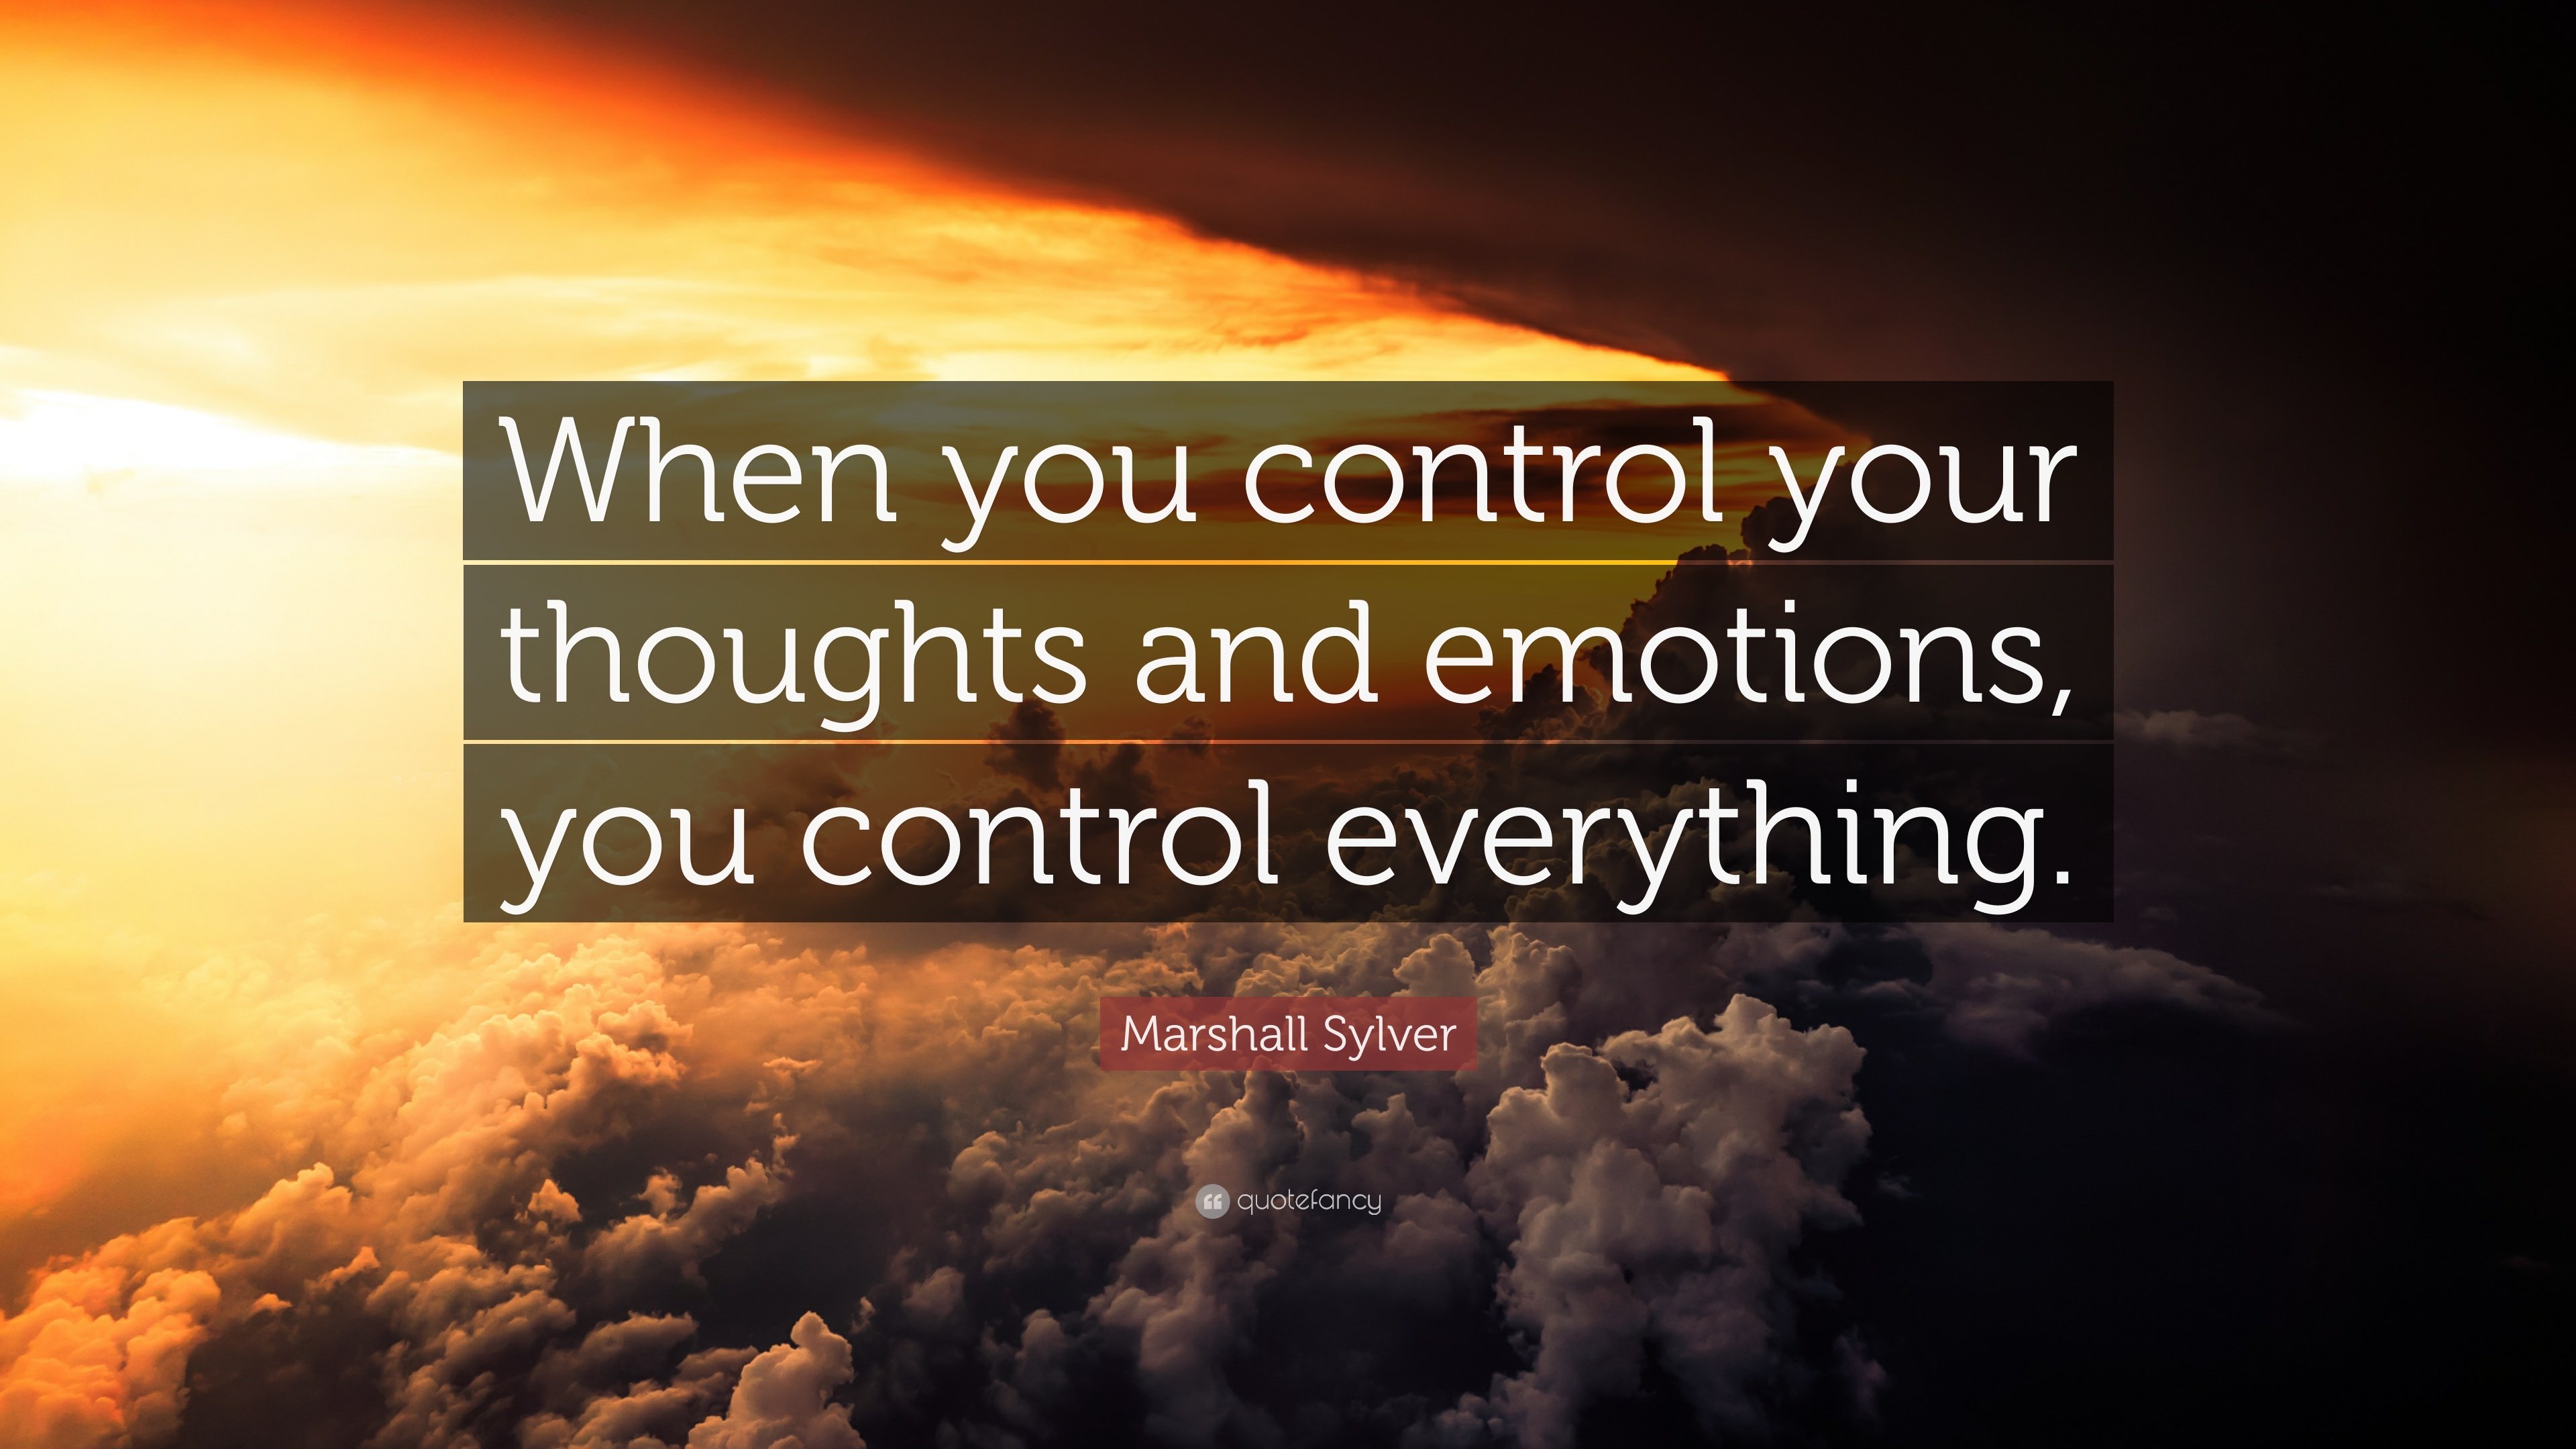 Marshall Sylver Quote: “When you control your thoughts